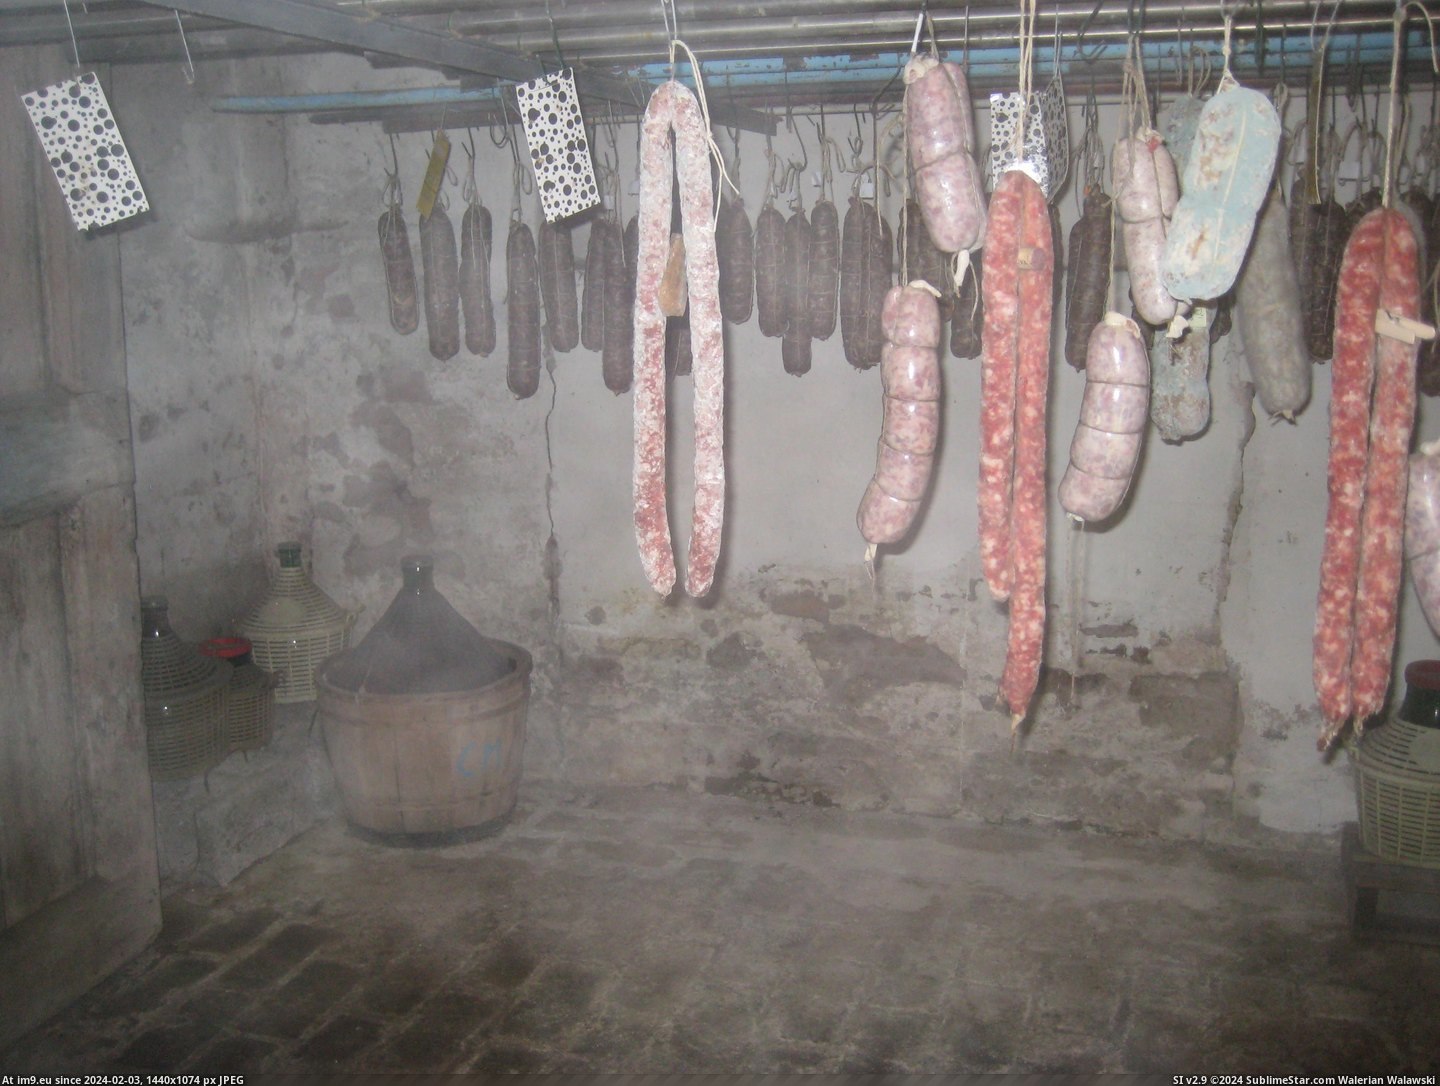 #Making #Homemade #Italy [Pics] Making homemade salami in Italy 9 Pic. (Image of album My r/PICS favs))